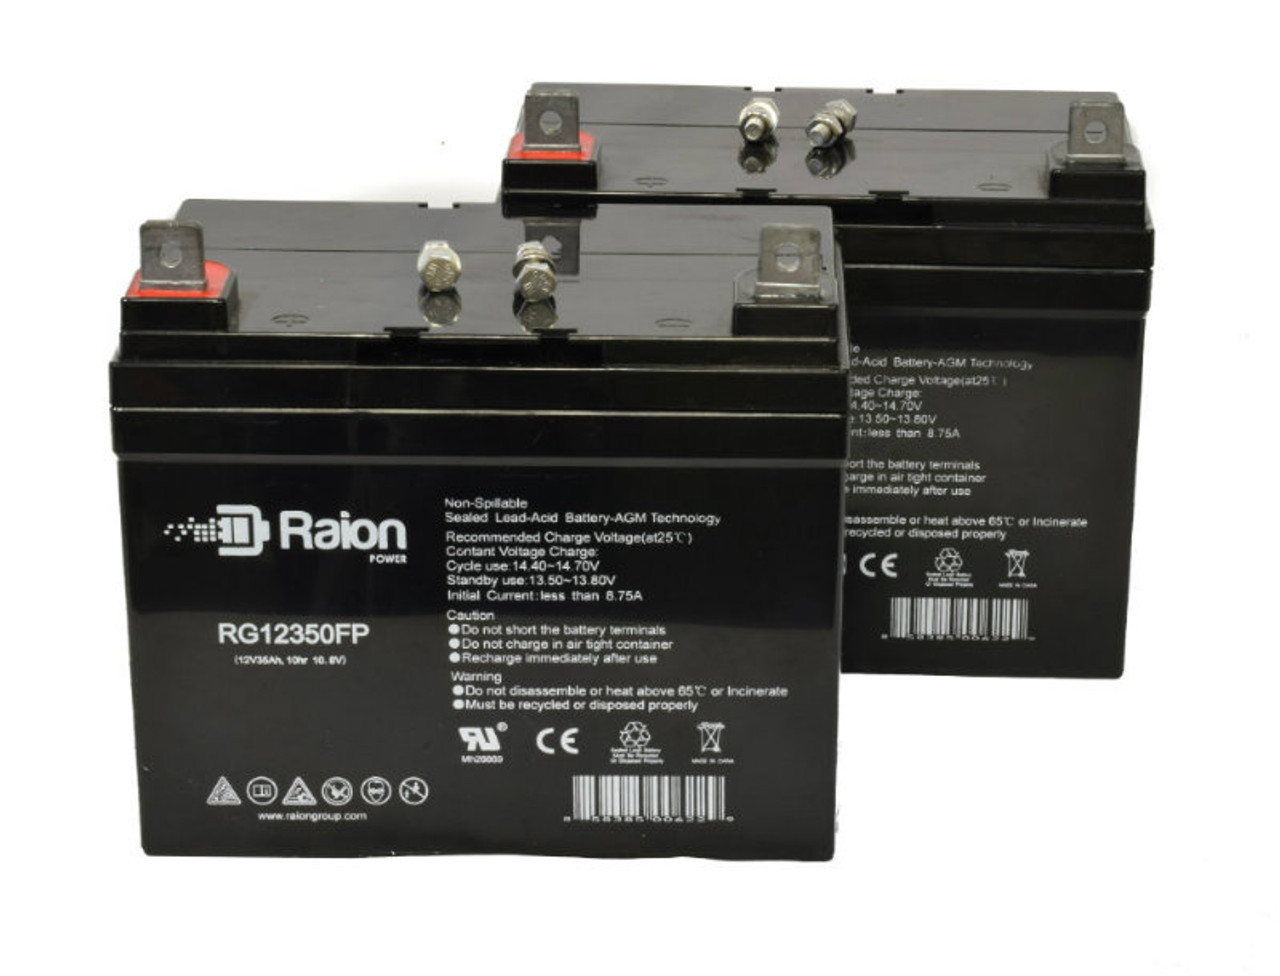 Raion Power Replacement 12V 35Ah Lawn Mower Battery for Lawn-Boy 9328E - 2 Pack